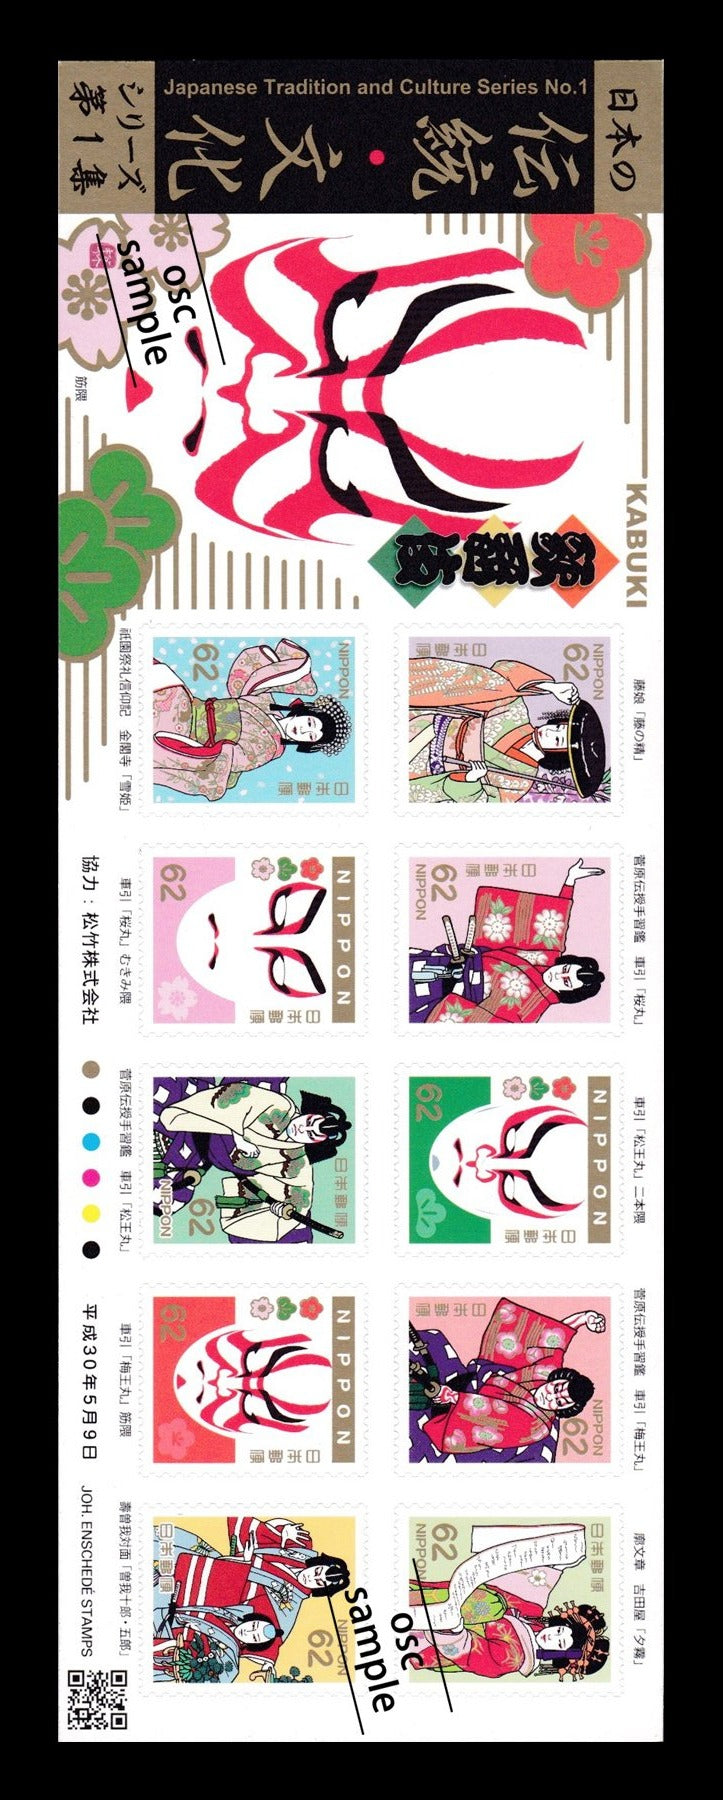 Japanese Tradition and Culture Series No.1 (62 yen)